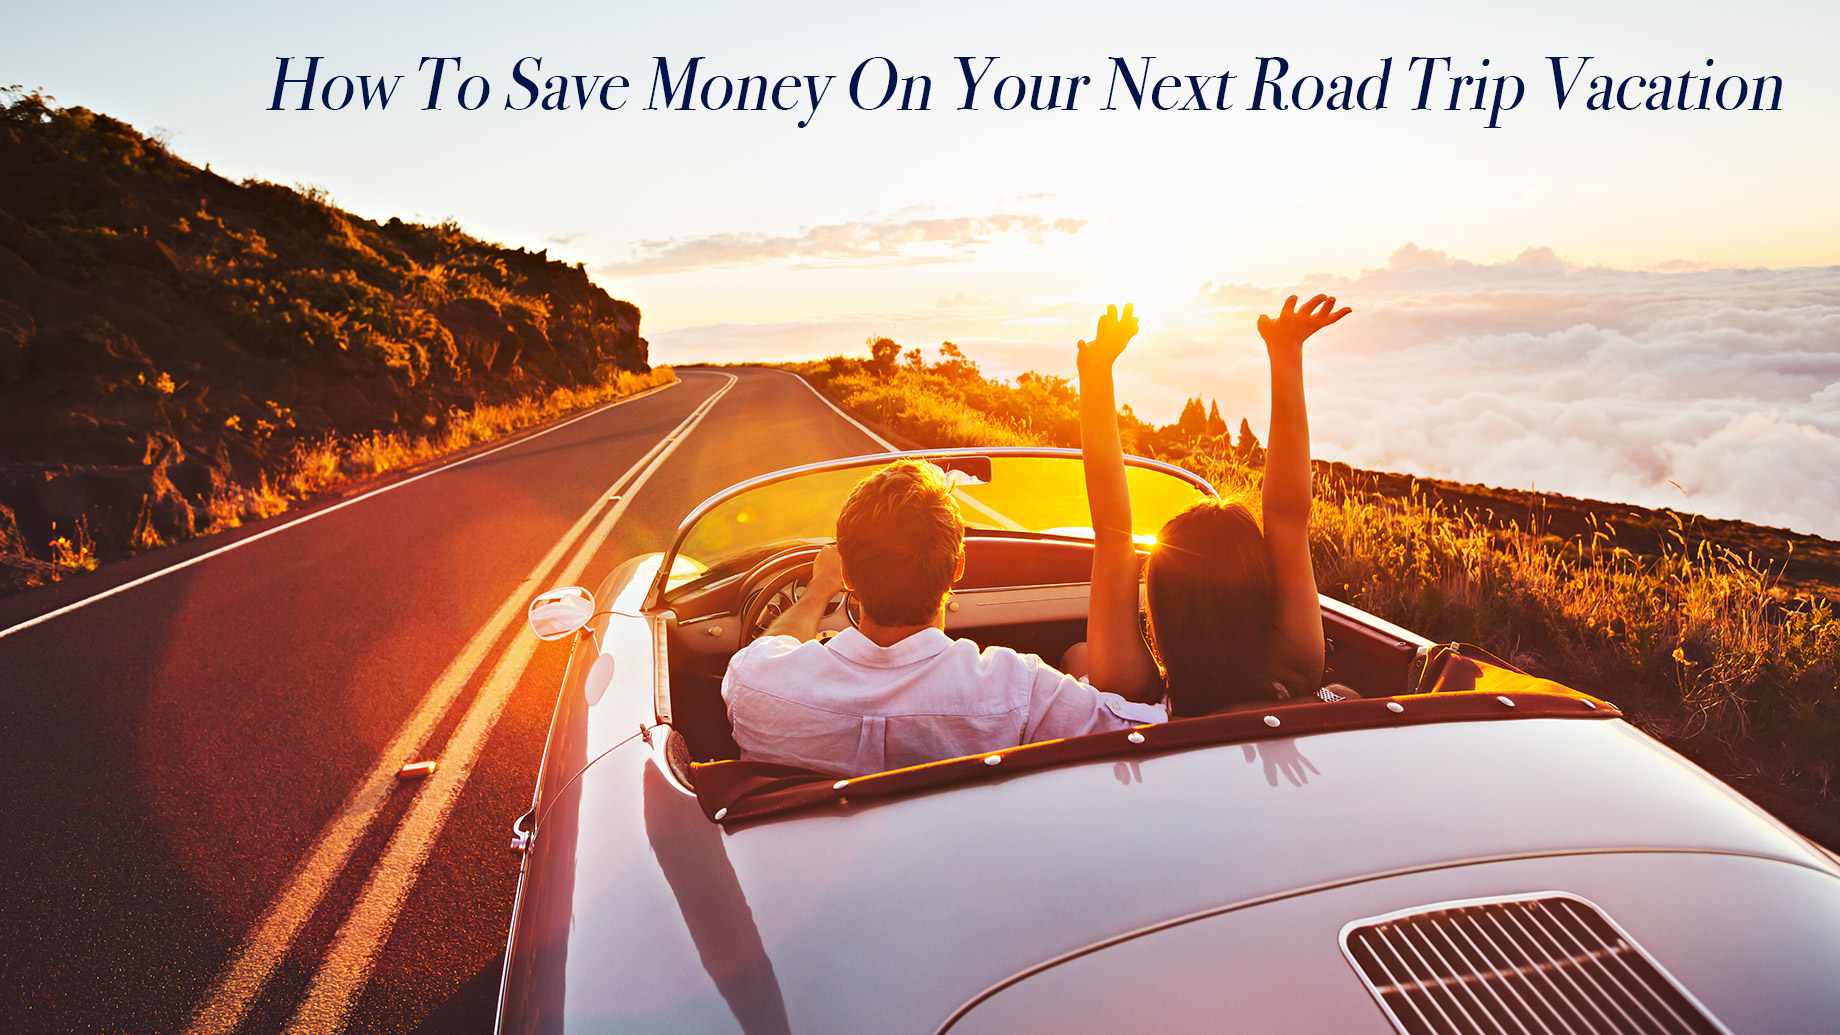 How To Save Money On Your Next Road Trip Vacation